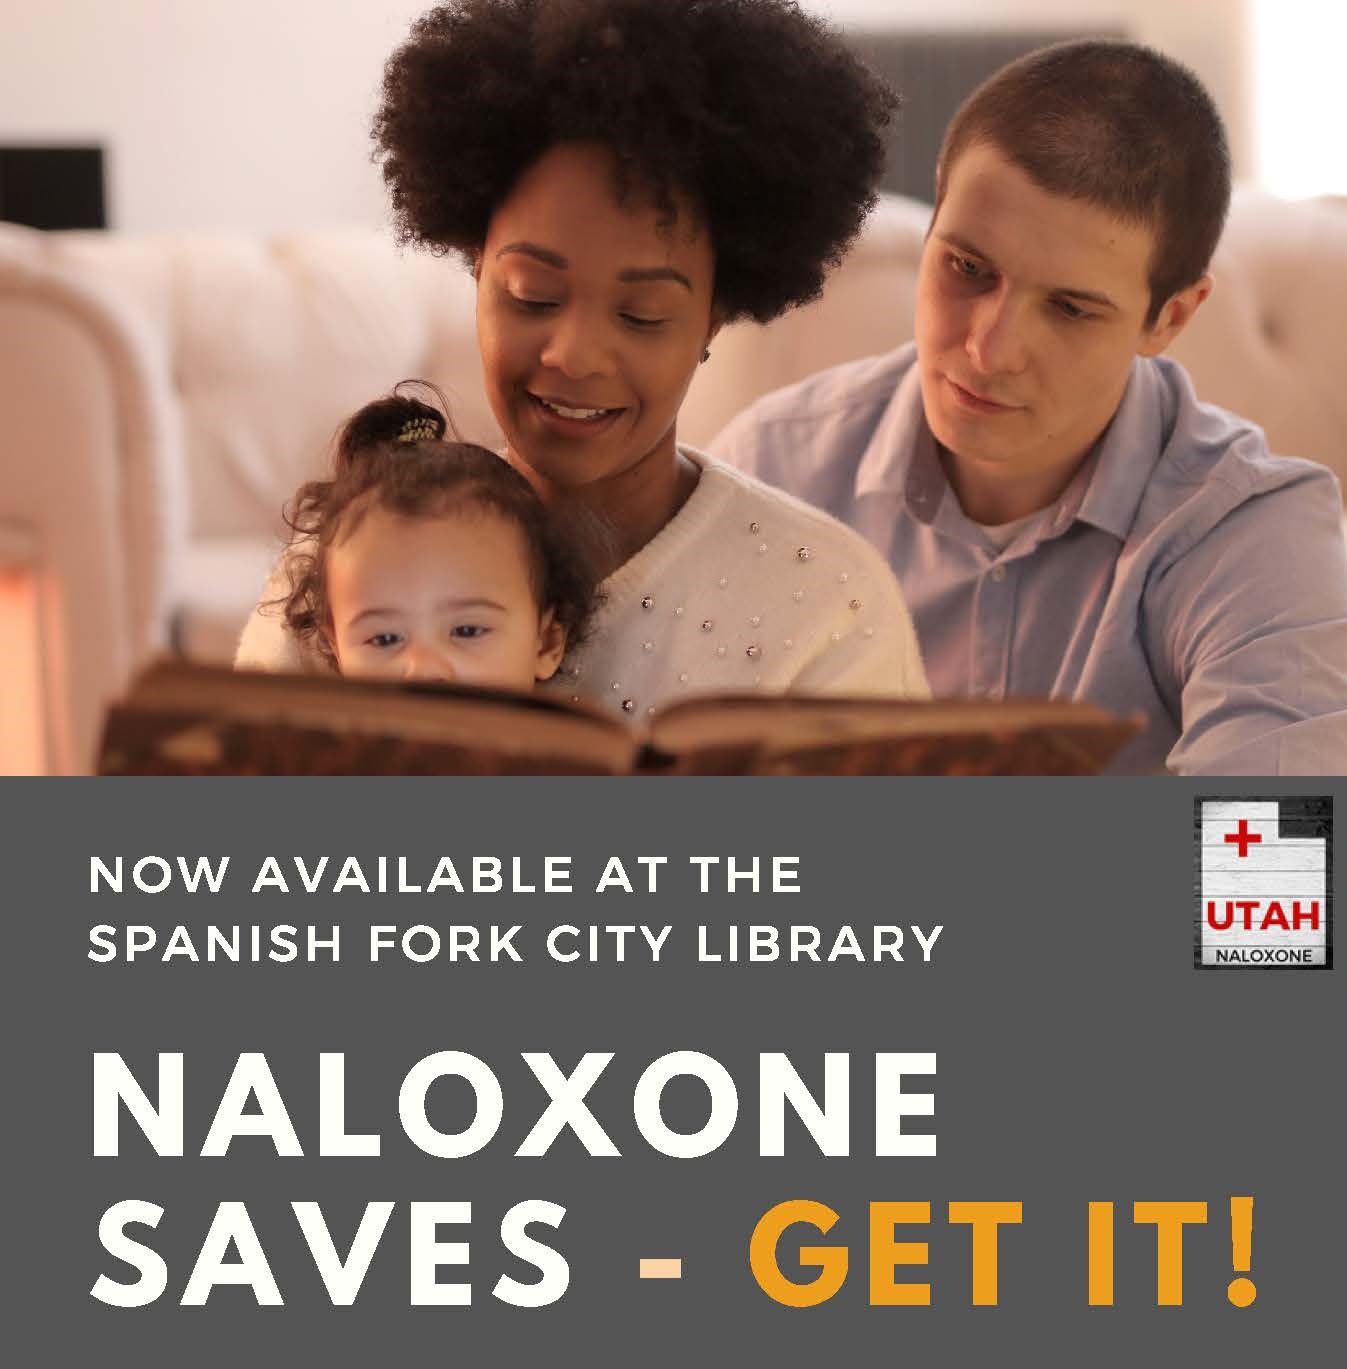 Now available at the Spanish Fork City Library. Naloxone saves - Get it!